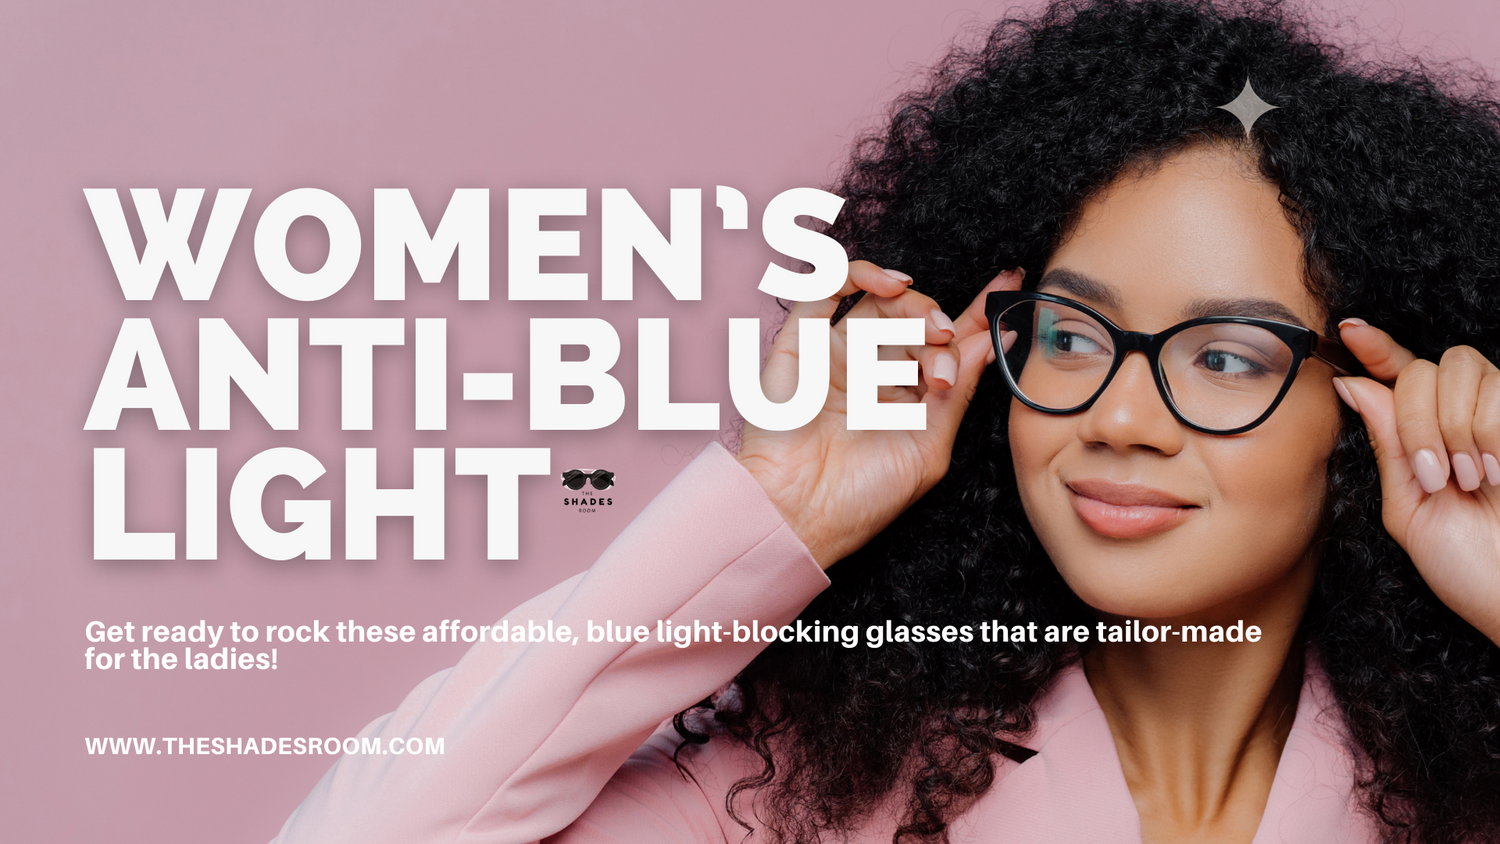 Shop The Latest Trends In Womens Eyewear  at The Shades Room